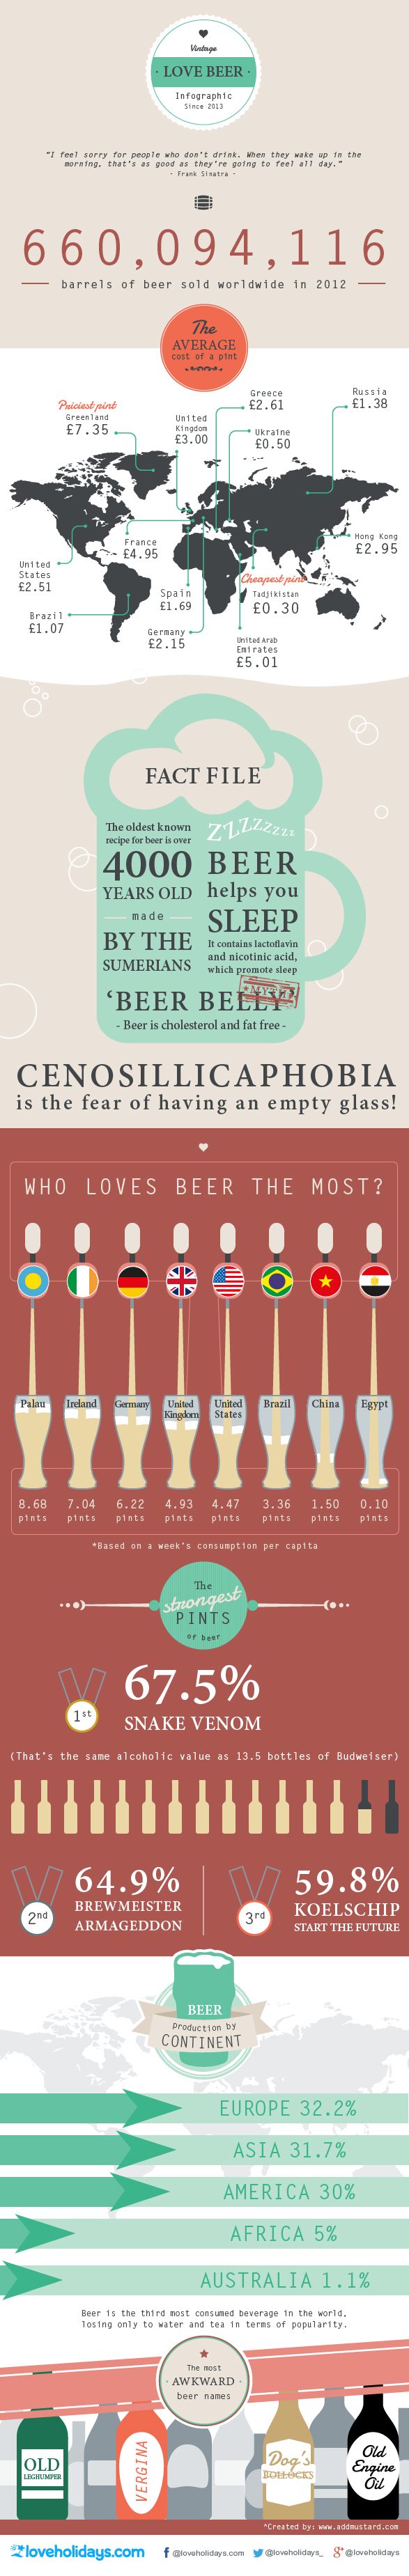 Who Loves Beer the Most?